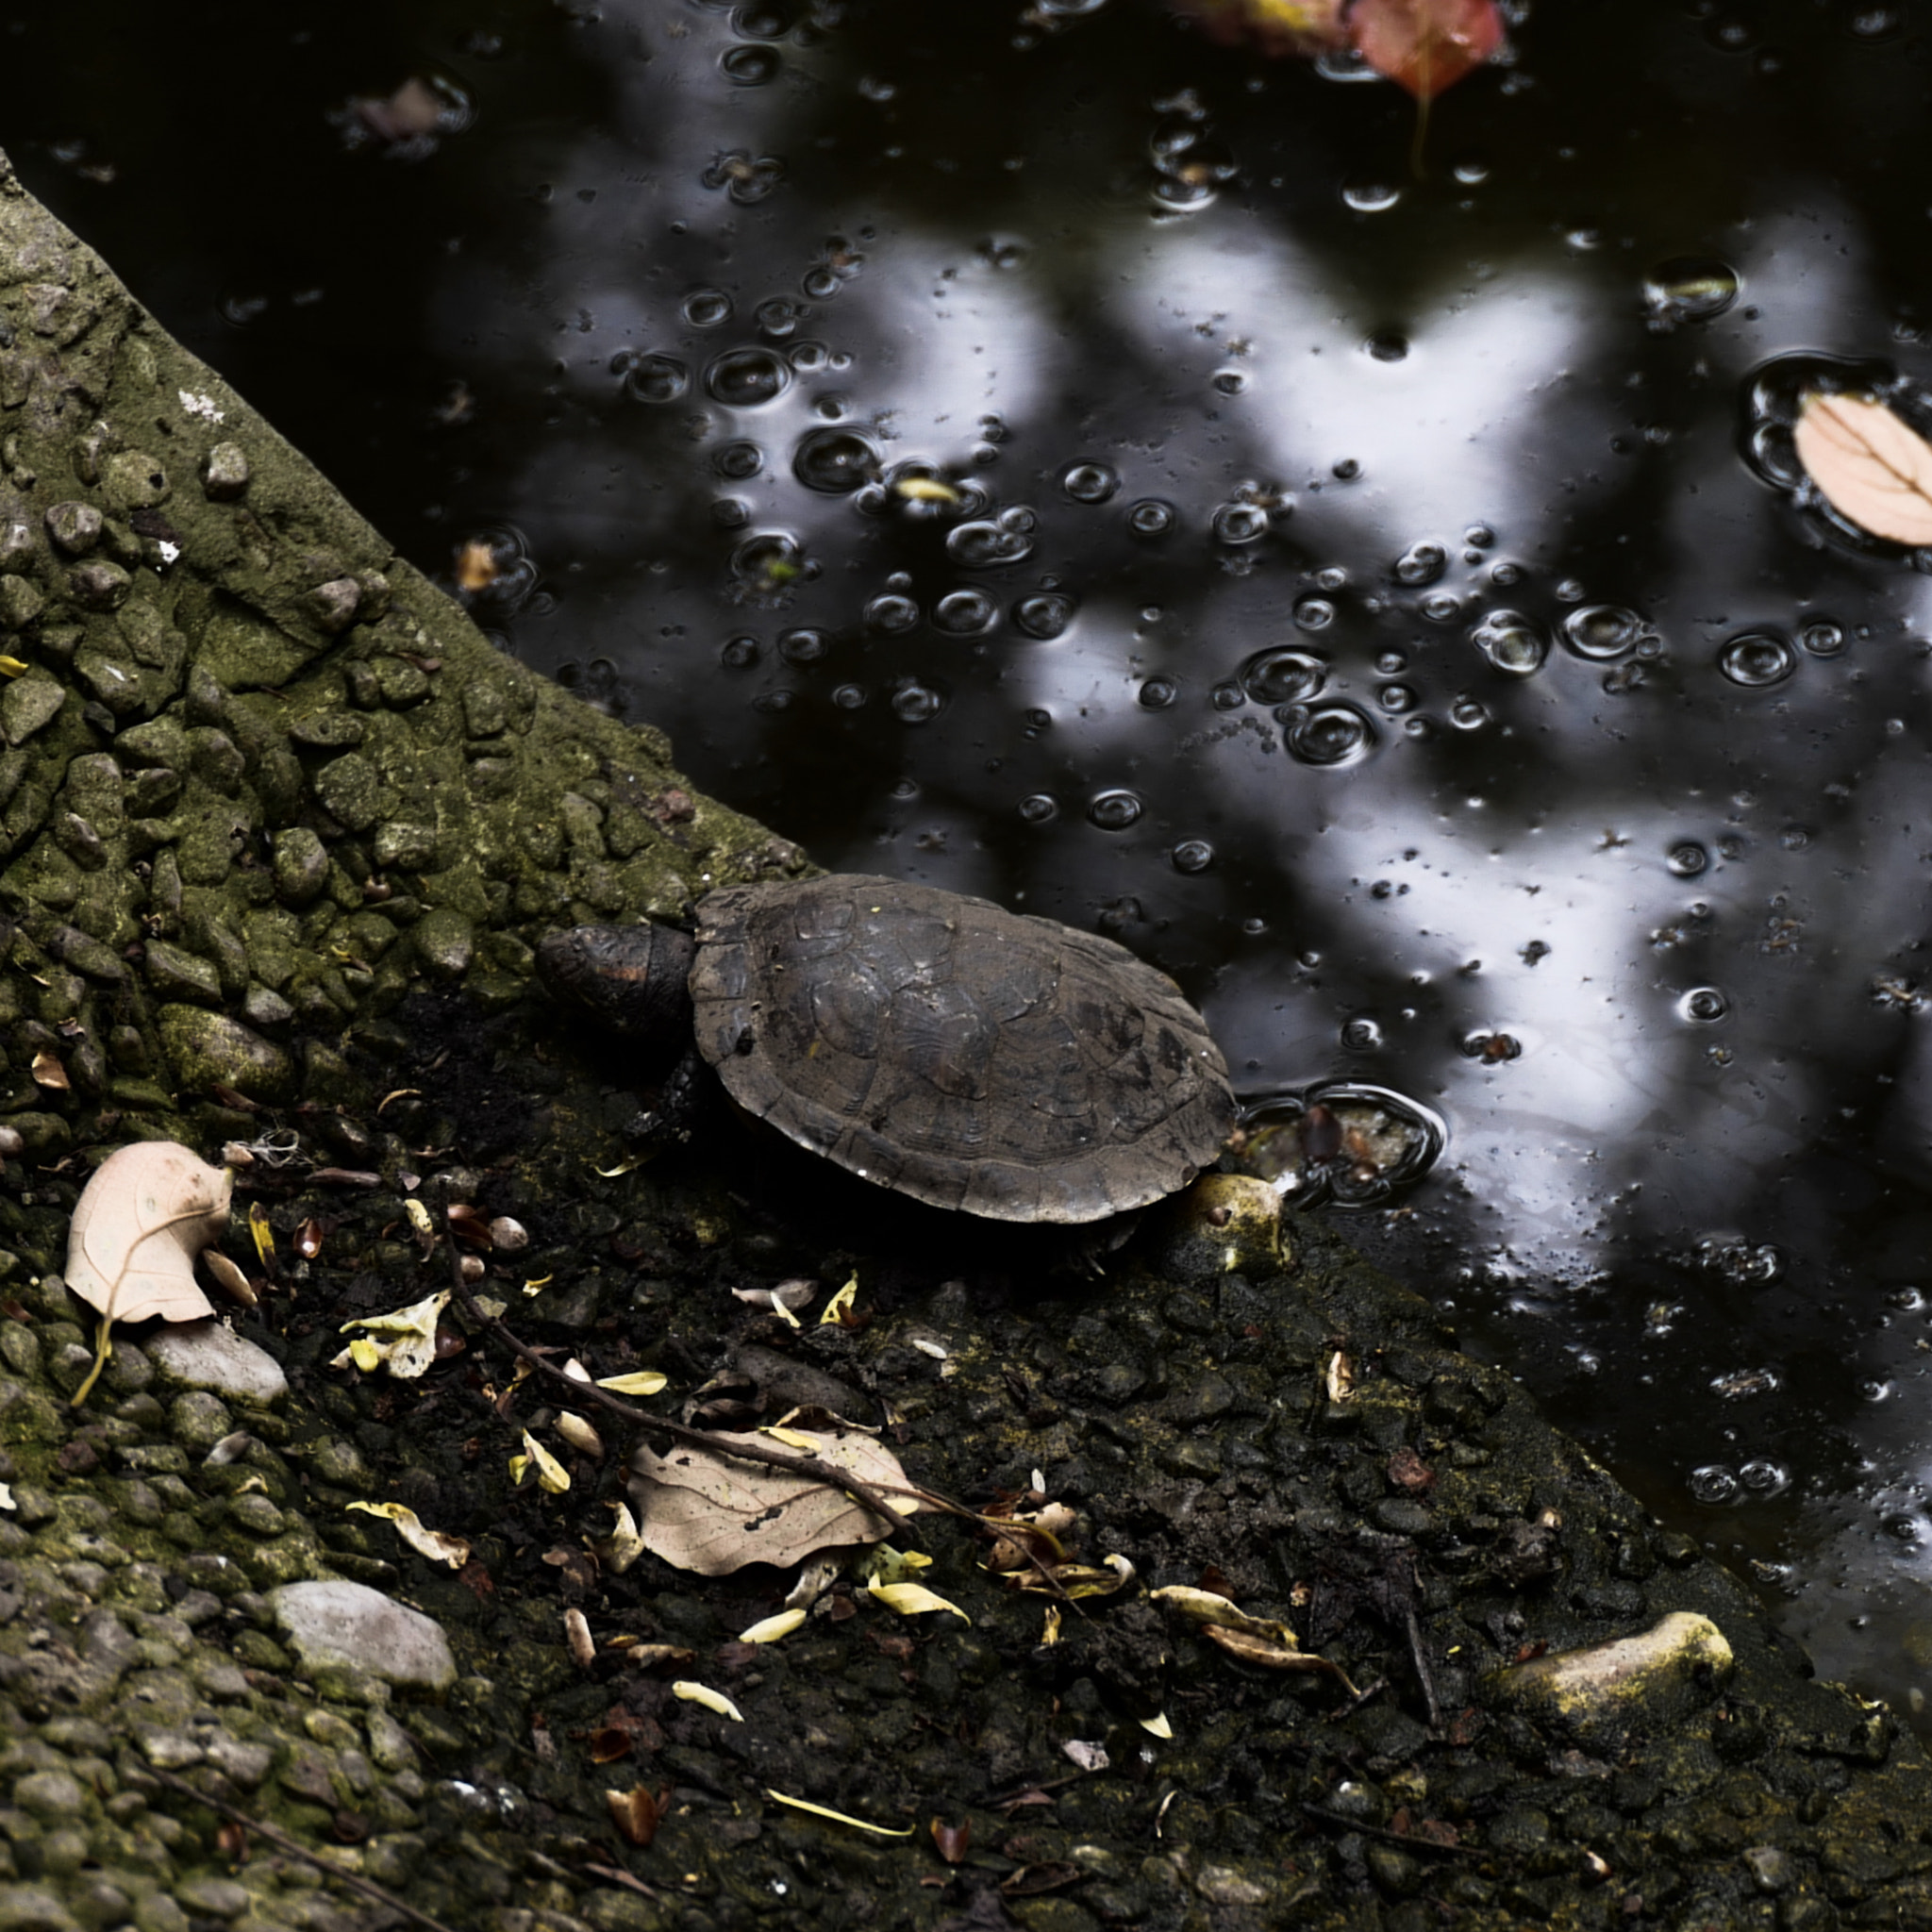 VARIO-ELMARIT 1:2.8-4.0/24-90mm ASPH. OIS sample photo. The basking turtles in temple 04 photography